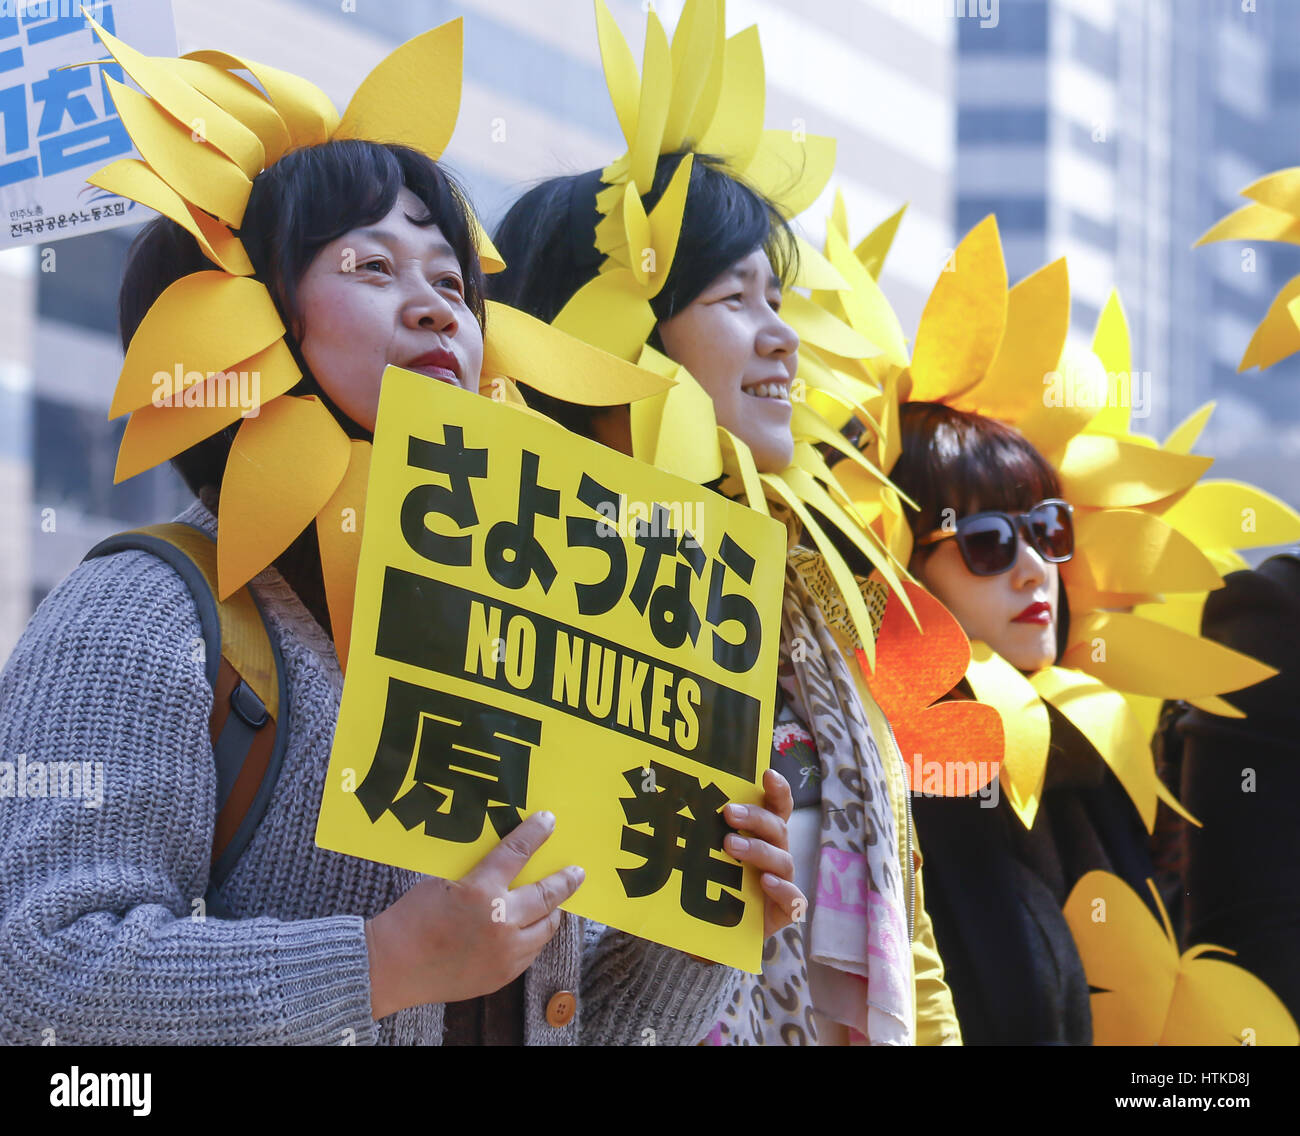 The sixth anniversary of the 2011 Fukushima nuclear disaster, Mar 11, 2017 : People attend a memorial rally marking the sixth anniversary of the 2011 Fukushima nuclear disaster in Seoul, South Korea. The March 11, 2011 earthquake and tsunami killed more than 18,000 people in Japan. Participants demanded the government to stop nuclear project and establish more solar energy generation during a rally which was held also as a part of mass rally held to celebrate after the Constitutional Court on Friday upheld the impeachment of President Park Geun-hye. Credit: Lee Jae-Won/AFLO/Alamy Live News Stock Photo